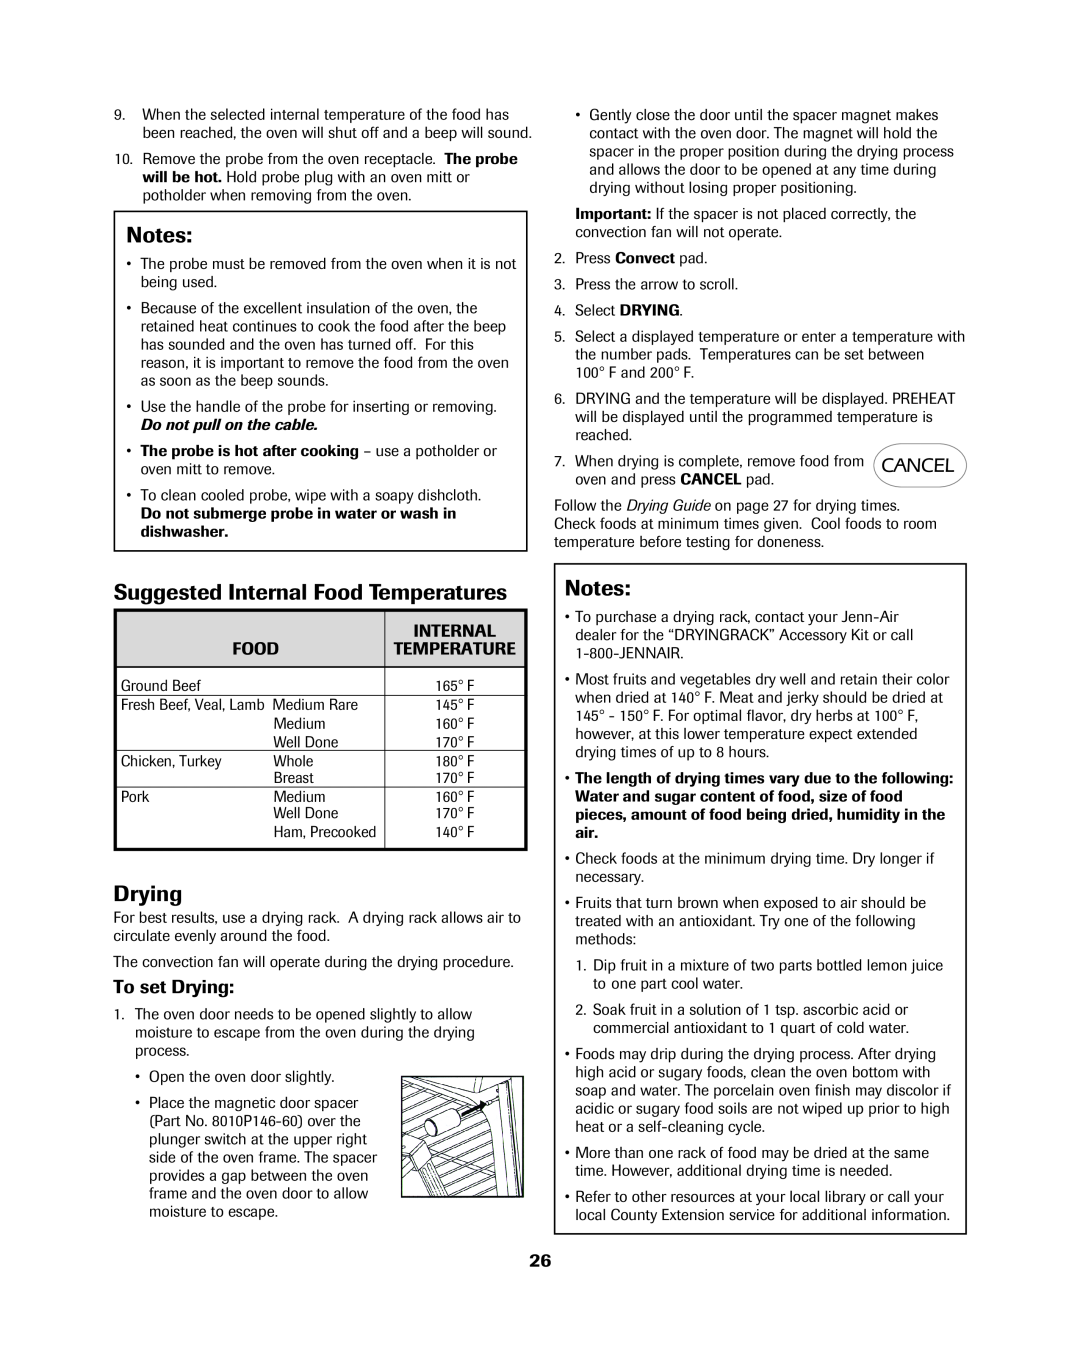 Jenn-Air 8113P754-60 important safety instructions Suggested Internal Food Temperatures, To set Drying 